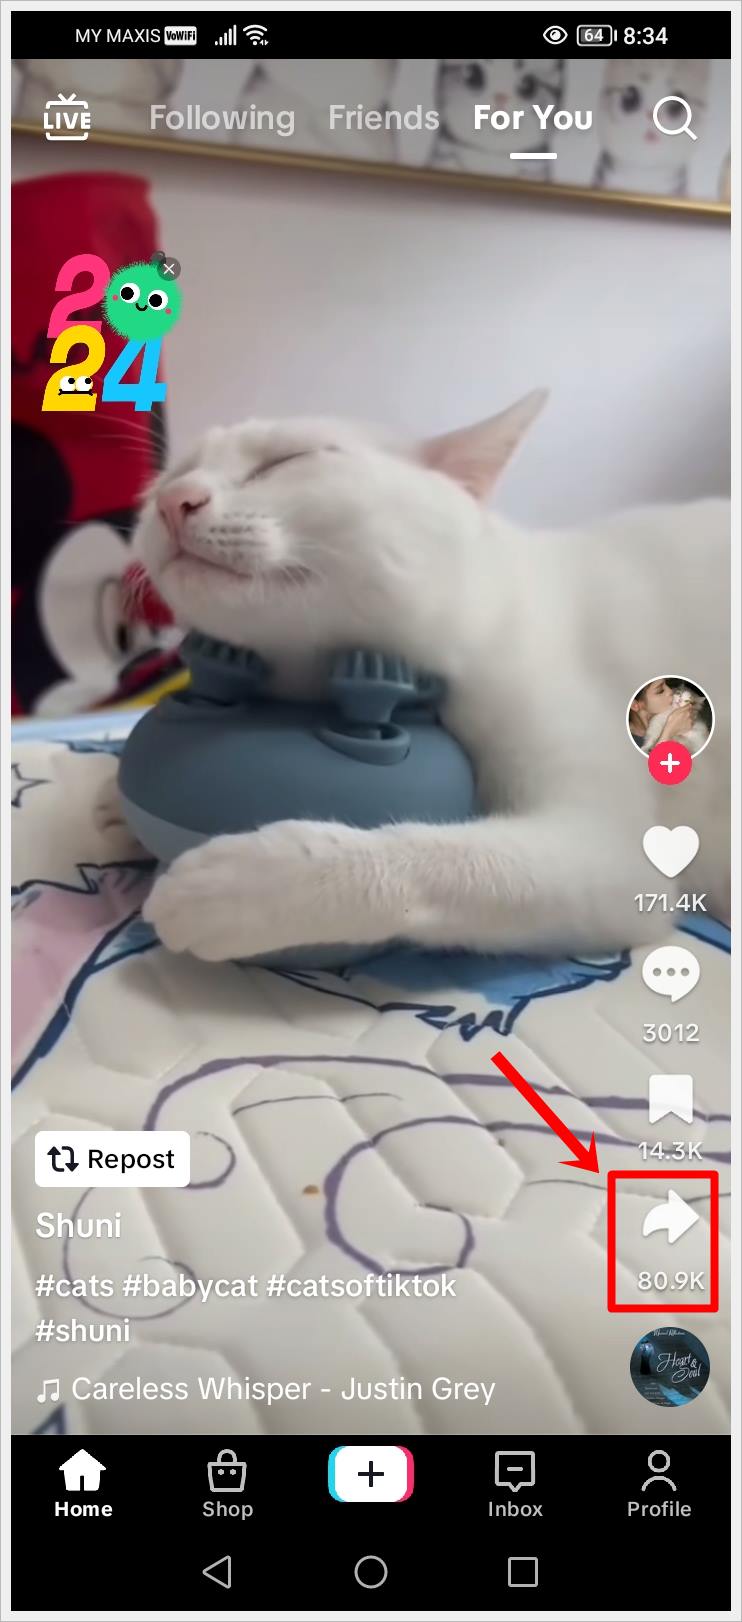 How to Download or Save TikTok Videos Easily: This image displays a screenshot of a TikTok 'For You' page, featuring a playing video. The 'Share' icon on the side of the video is highlighted.